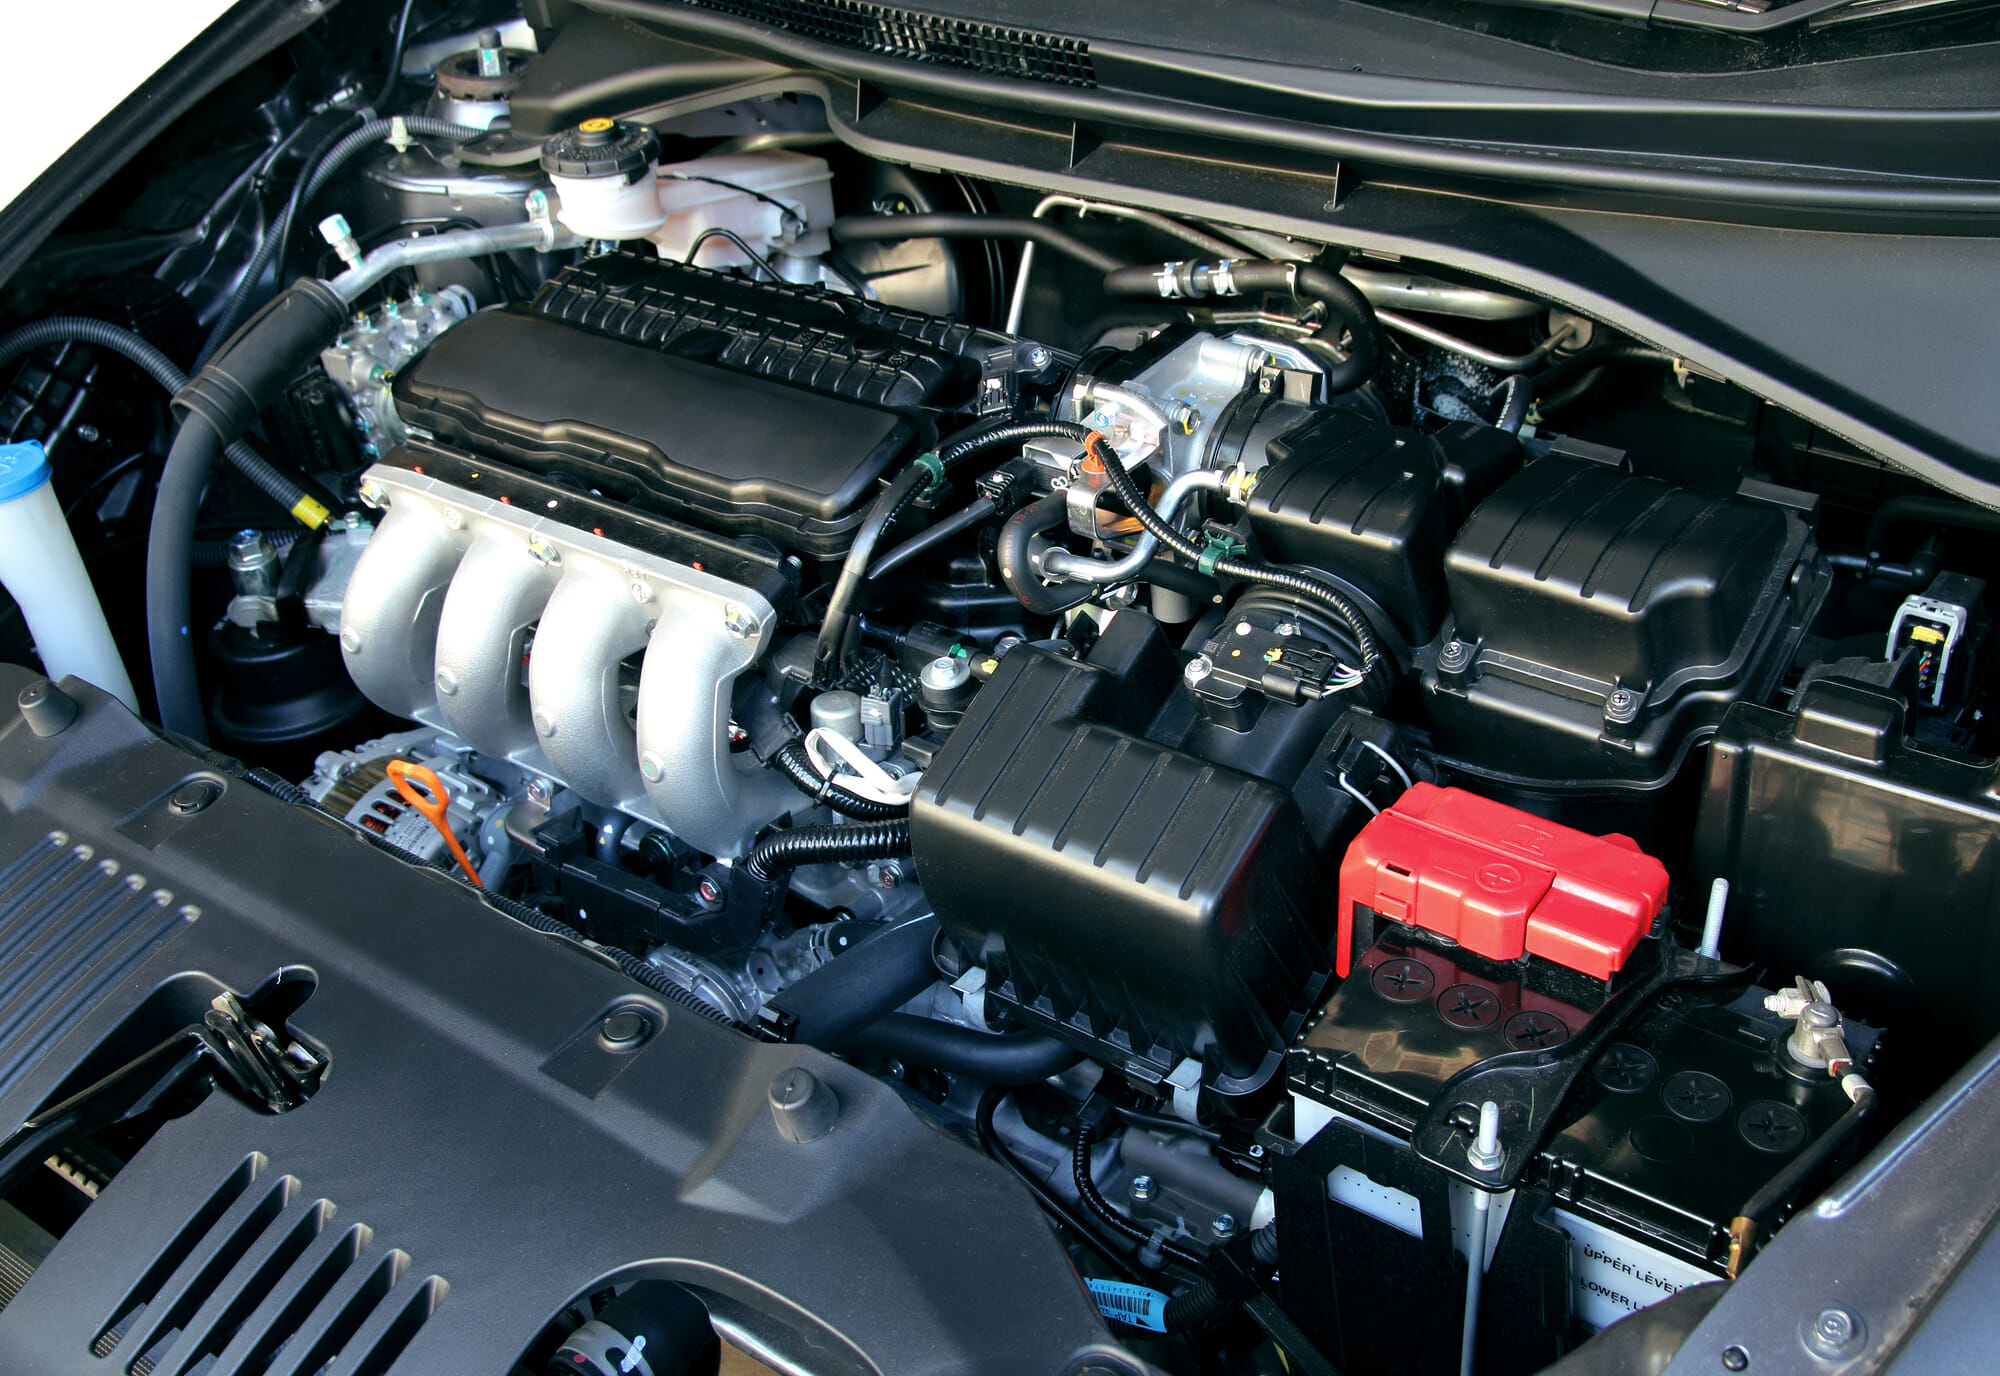 How to Fix an Overheating Car Engine